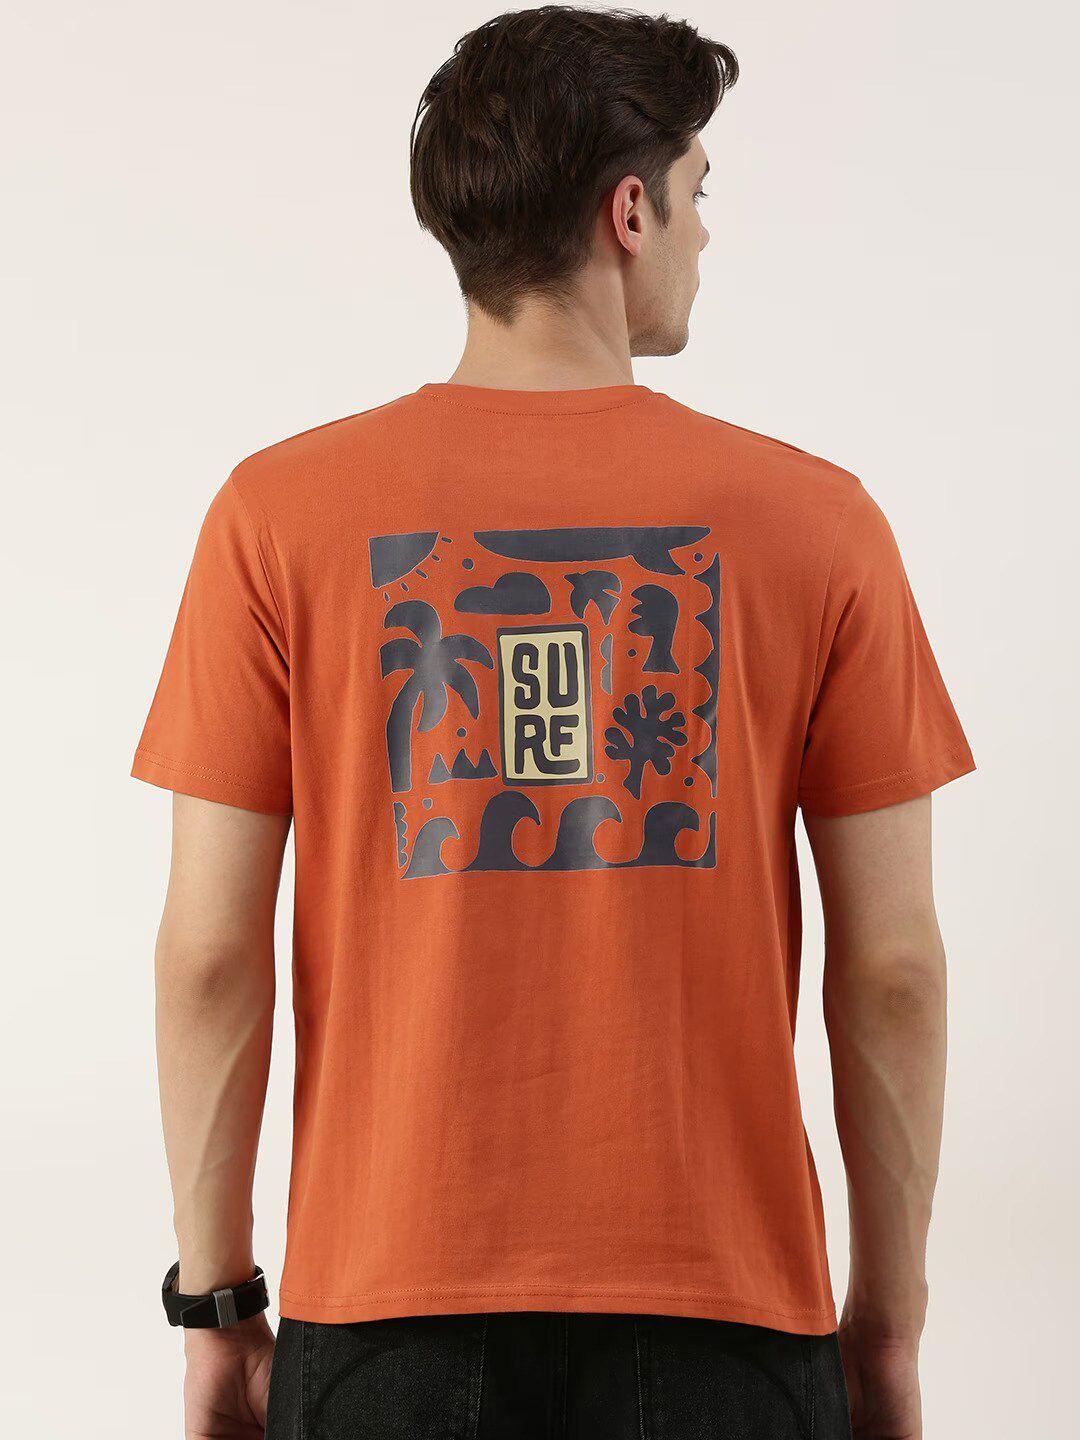 bene kleed graphic printed pure cotton t-shirt